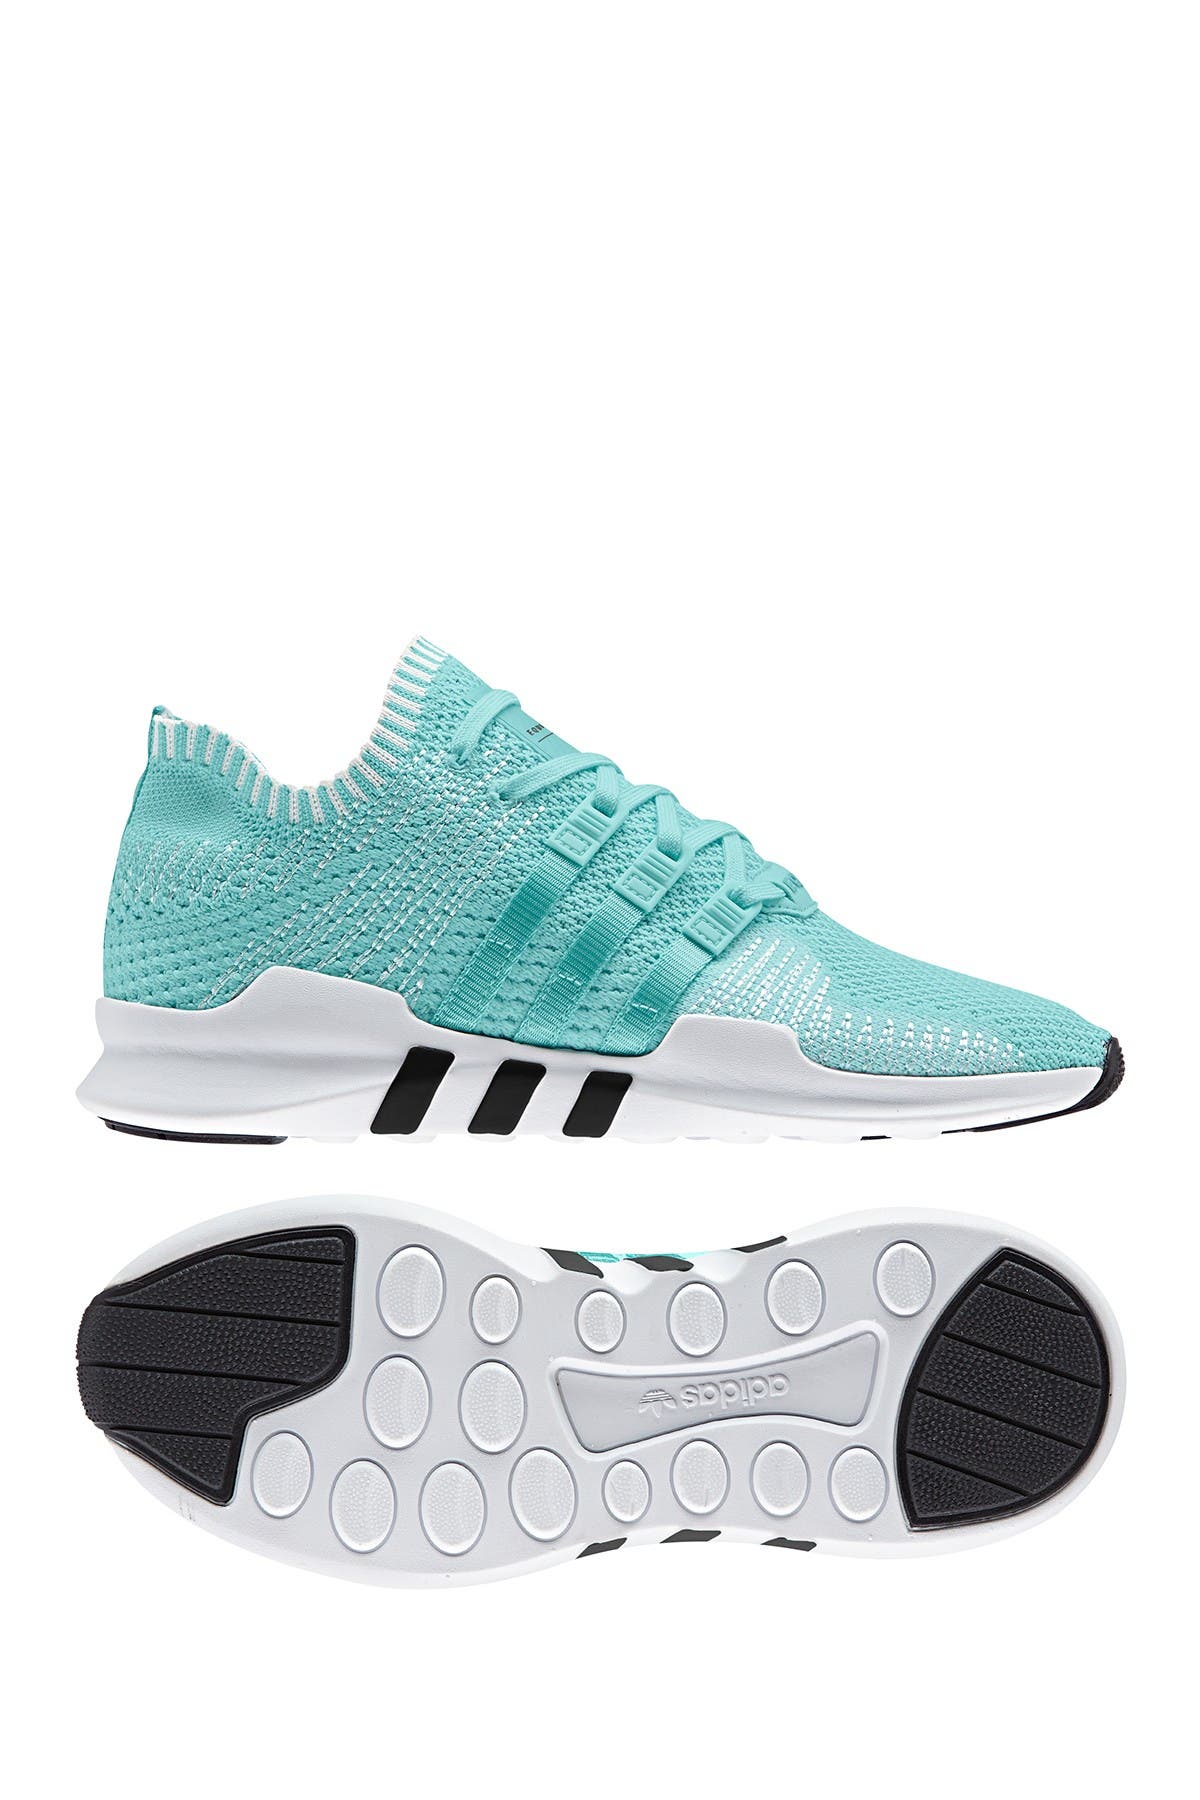 eqt support sizing